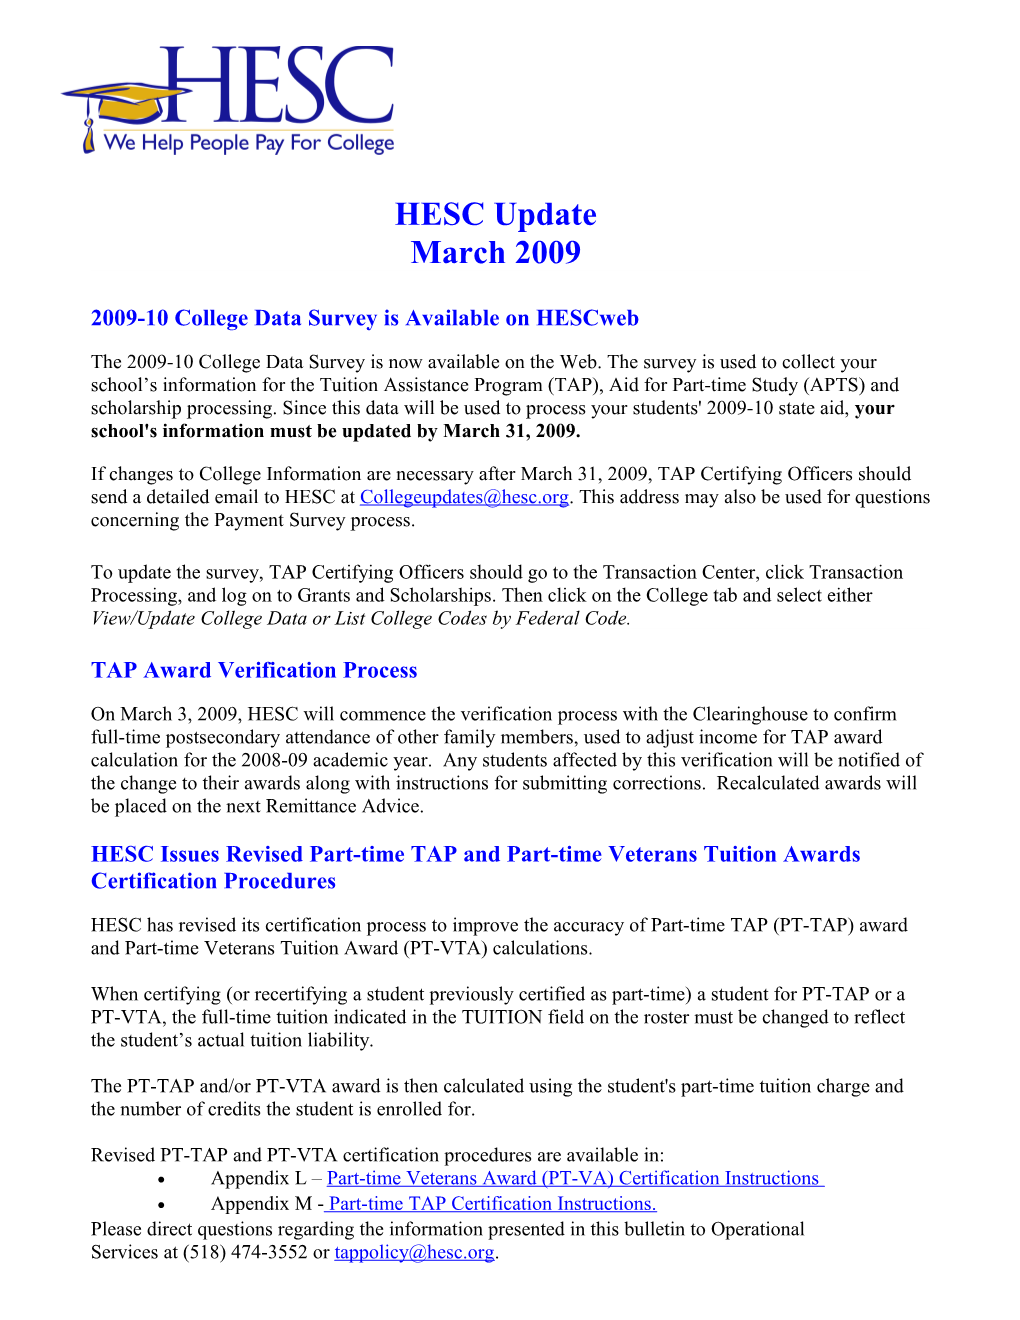 2009-10 College Data Survey Is Available on Hescweb